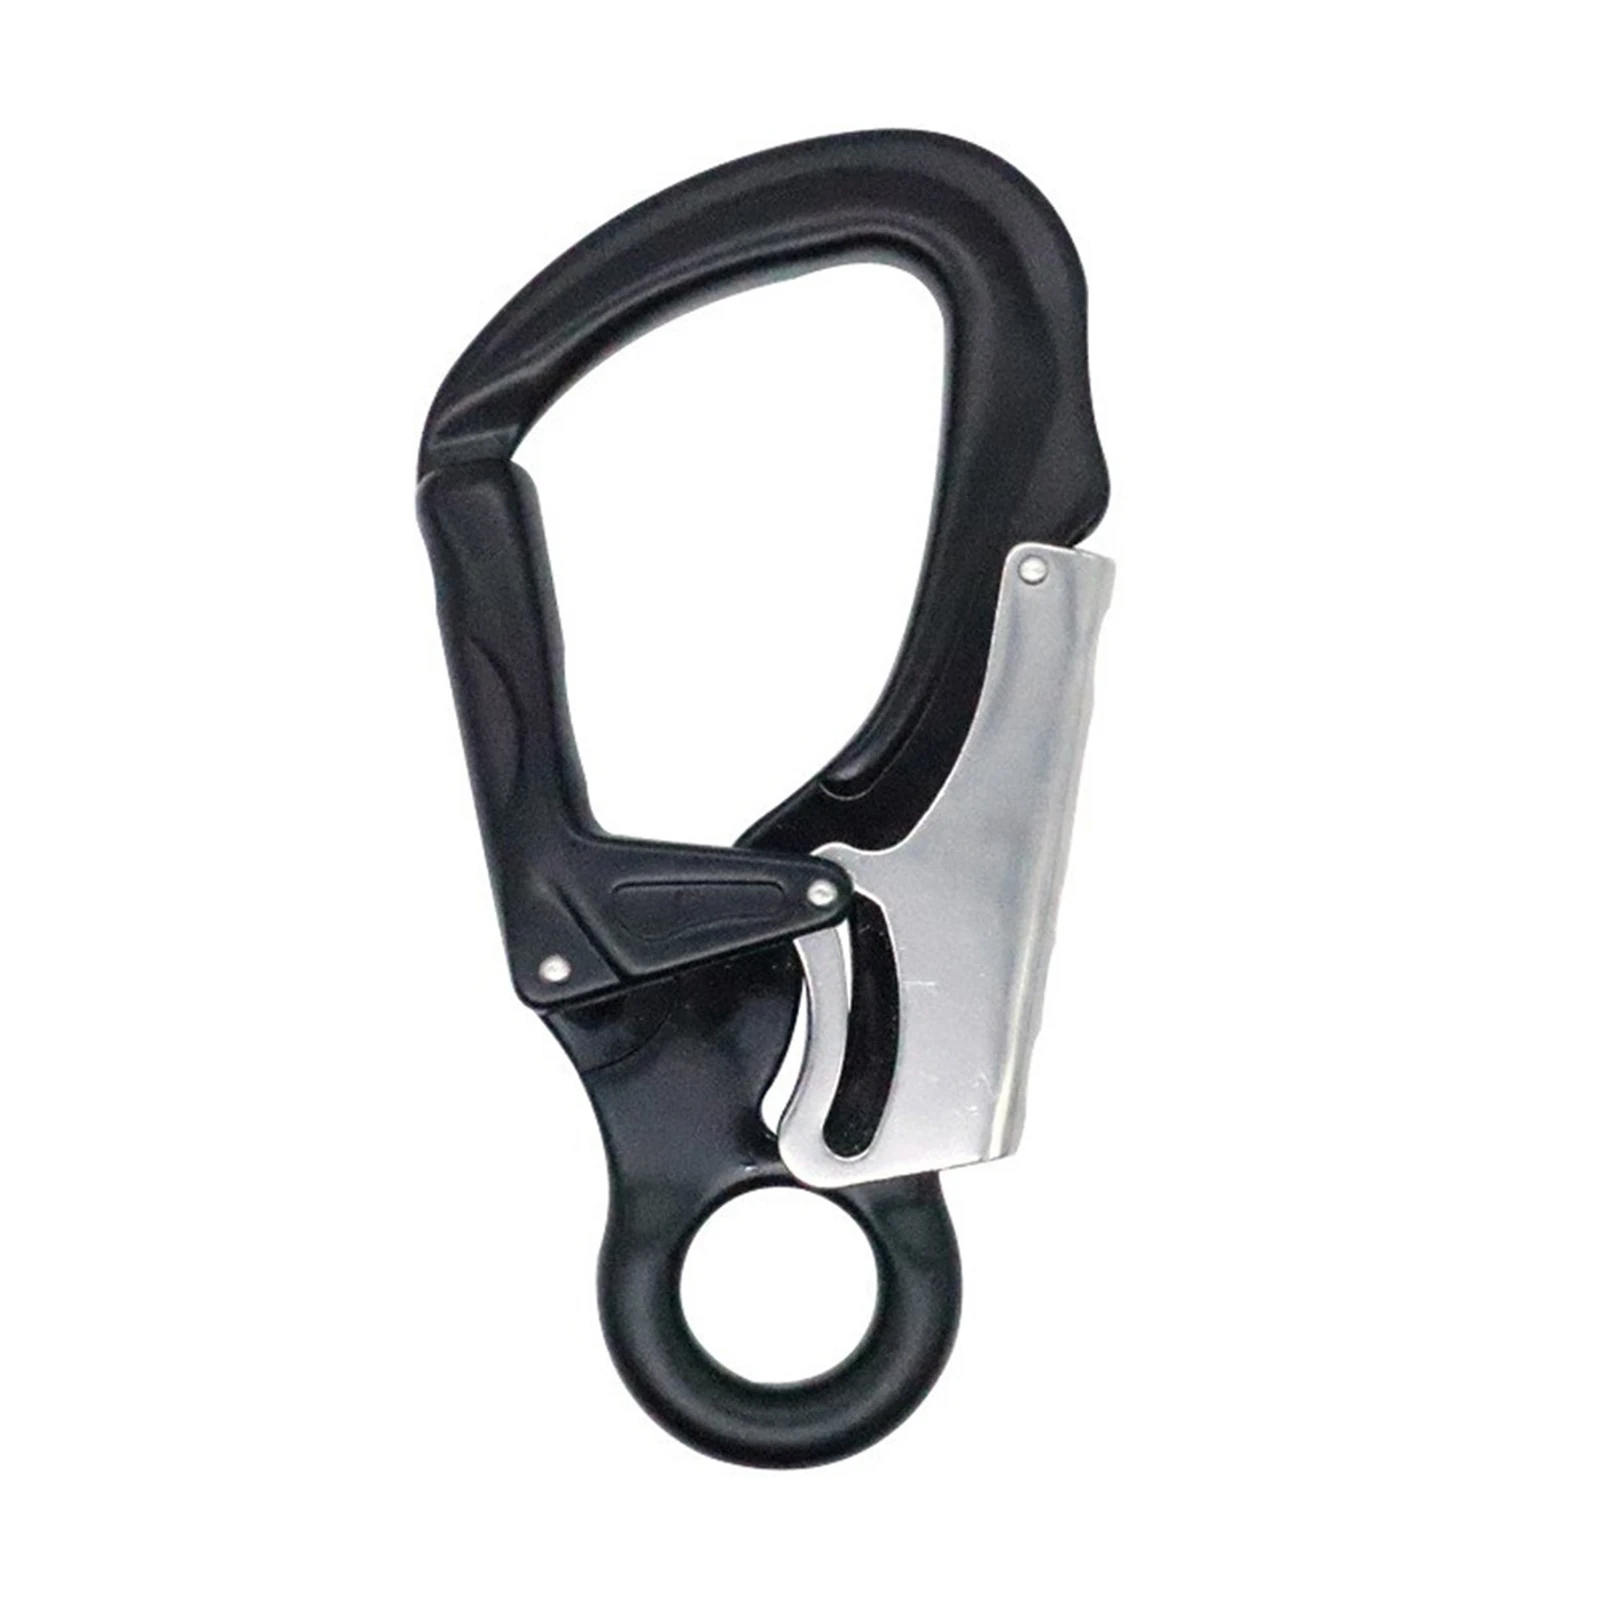 

Heavy Duty Locking Carabiner Clips Aluminum Quick Links Outdoor Traveling Equipment for Hammock Dog Leash Harness Keychains